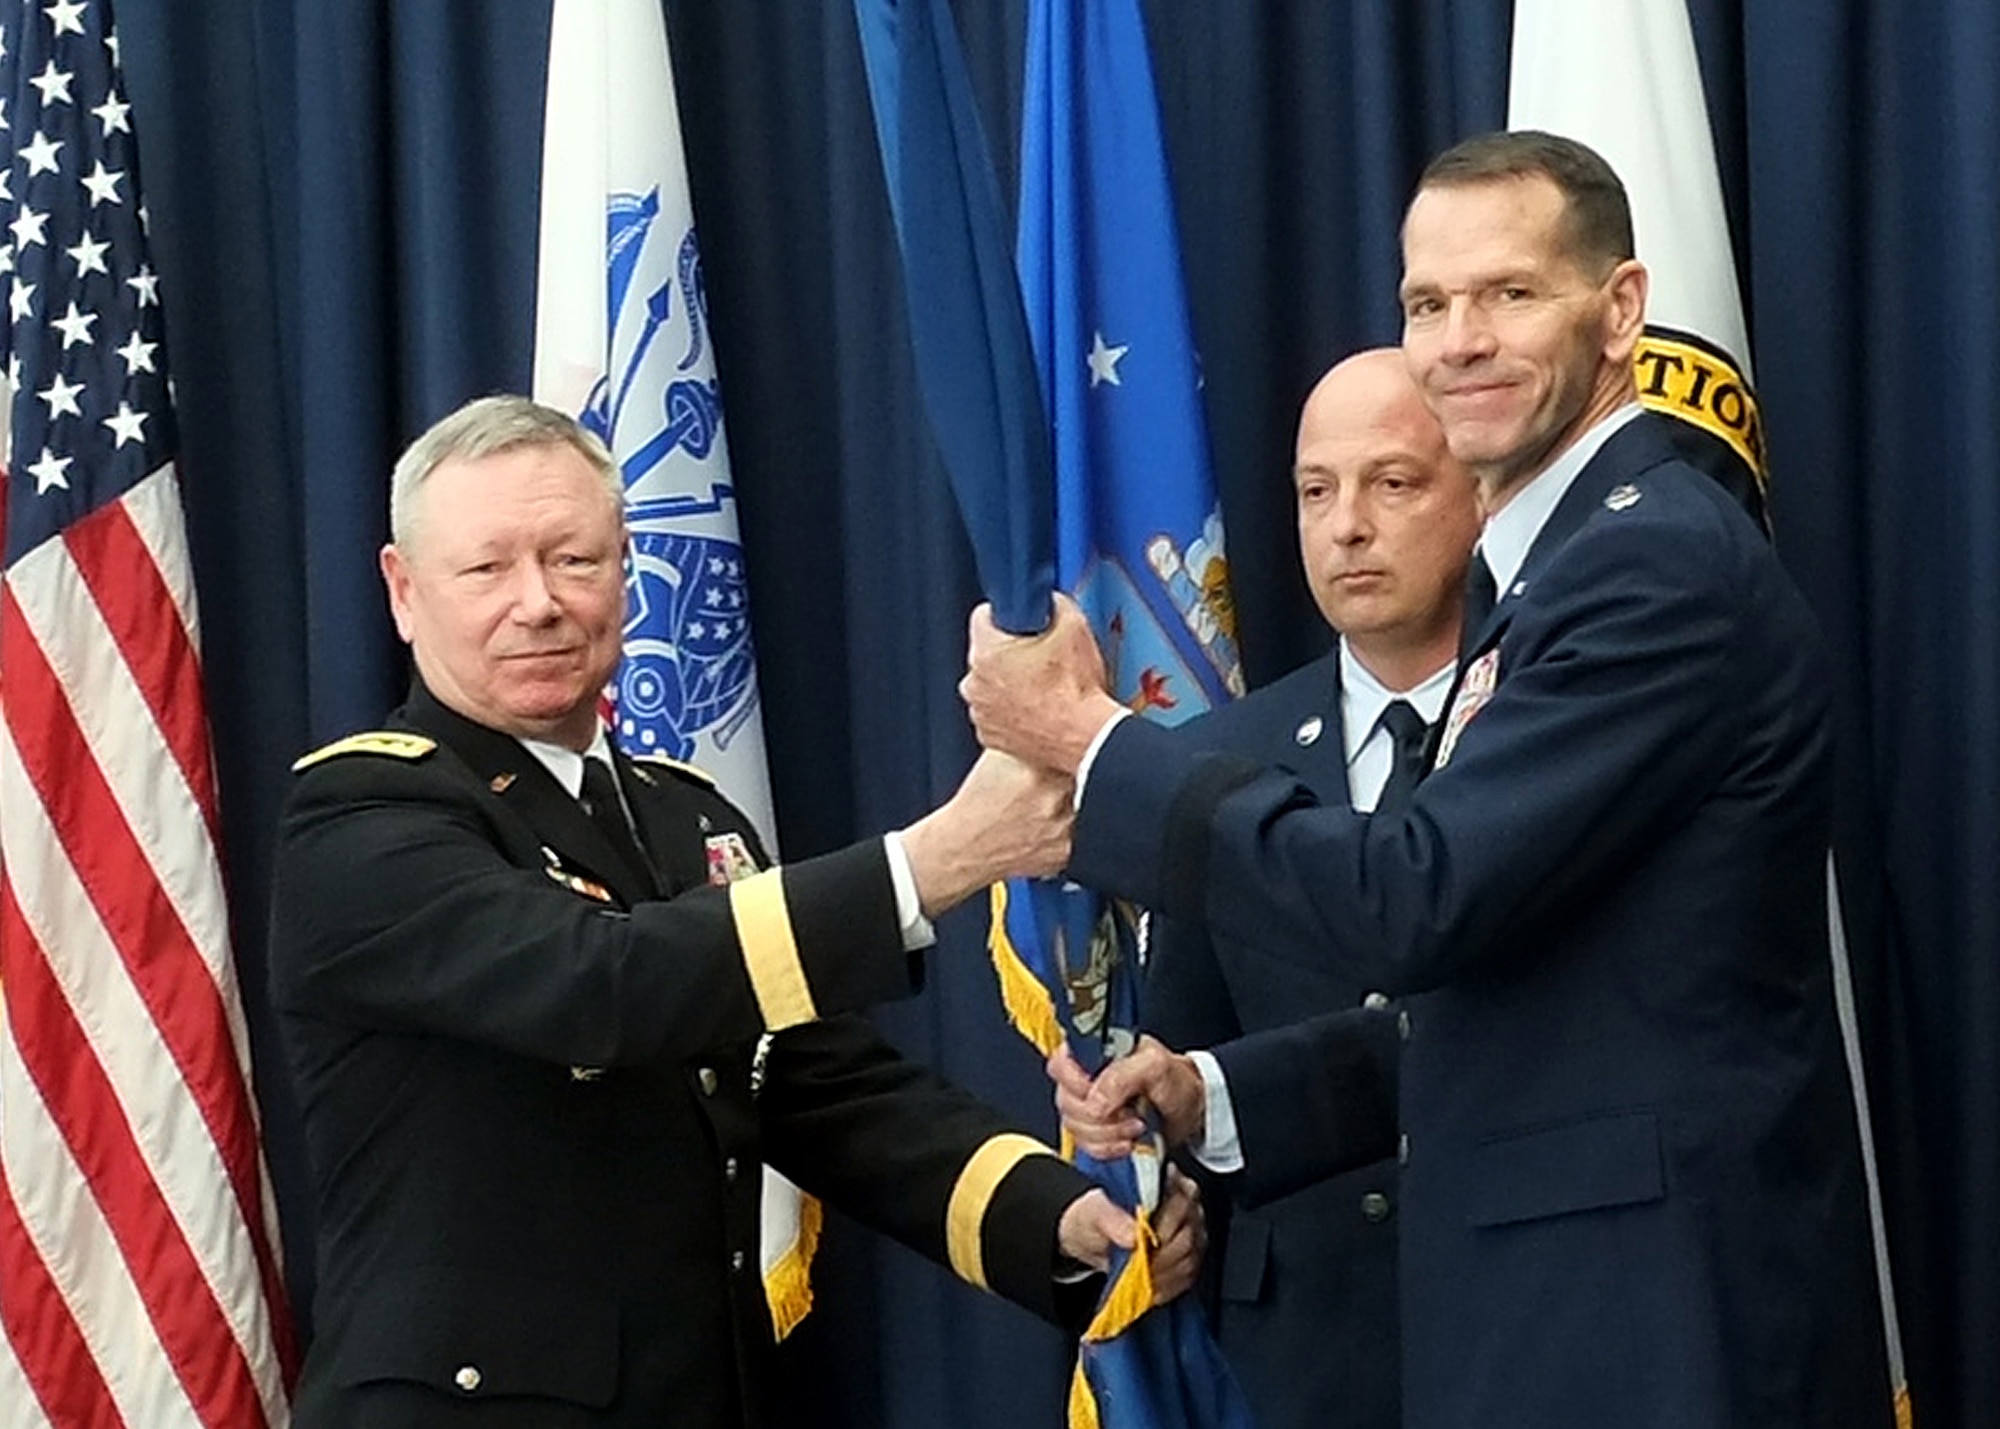 Lt. Gen. Stanley “Sid” Clarke III, right, the director of the Air National Guard, receives the organizational colors of the Air National Guard from Army Gen. Frank Grass, chief, National Guard Bureau, during a ceremony at the Air National Guard Readiness Center at Joint Base Andrews, Md., where Clarke assumed the responsibilities of his current position, Friday, March 22, 2013. Clarke takes over the duties of director from Air Force Lt. Gen. Harry "Bud" Wyatt, who recently retired. (U.S. Army photo by Sgt. 1st Class Jon Soucy)